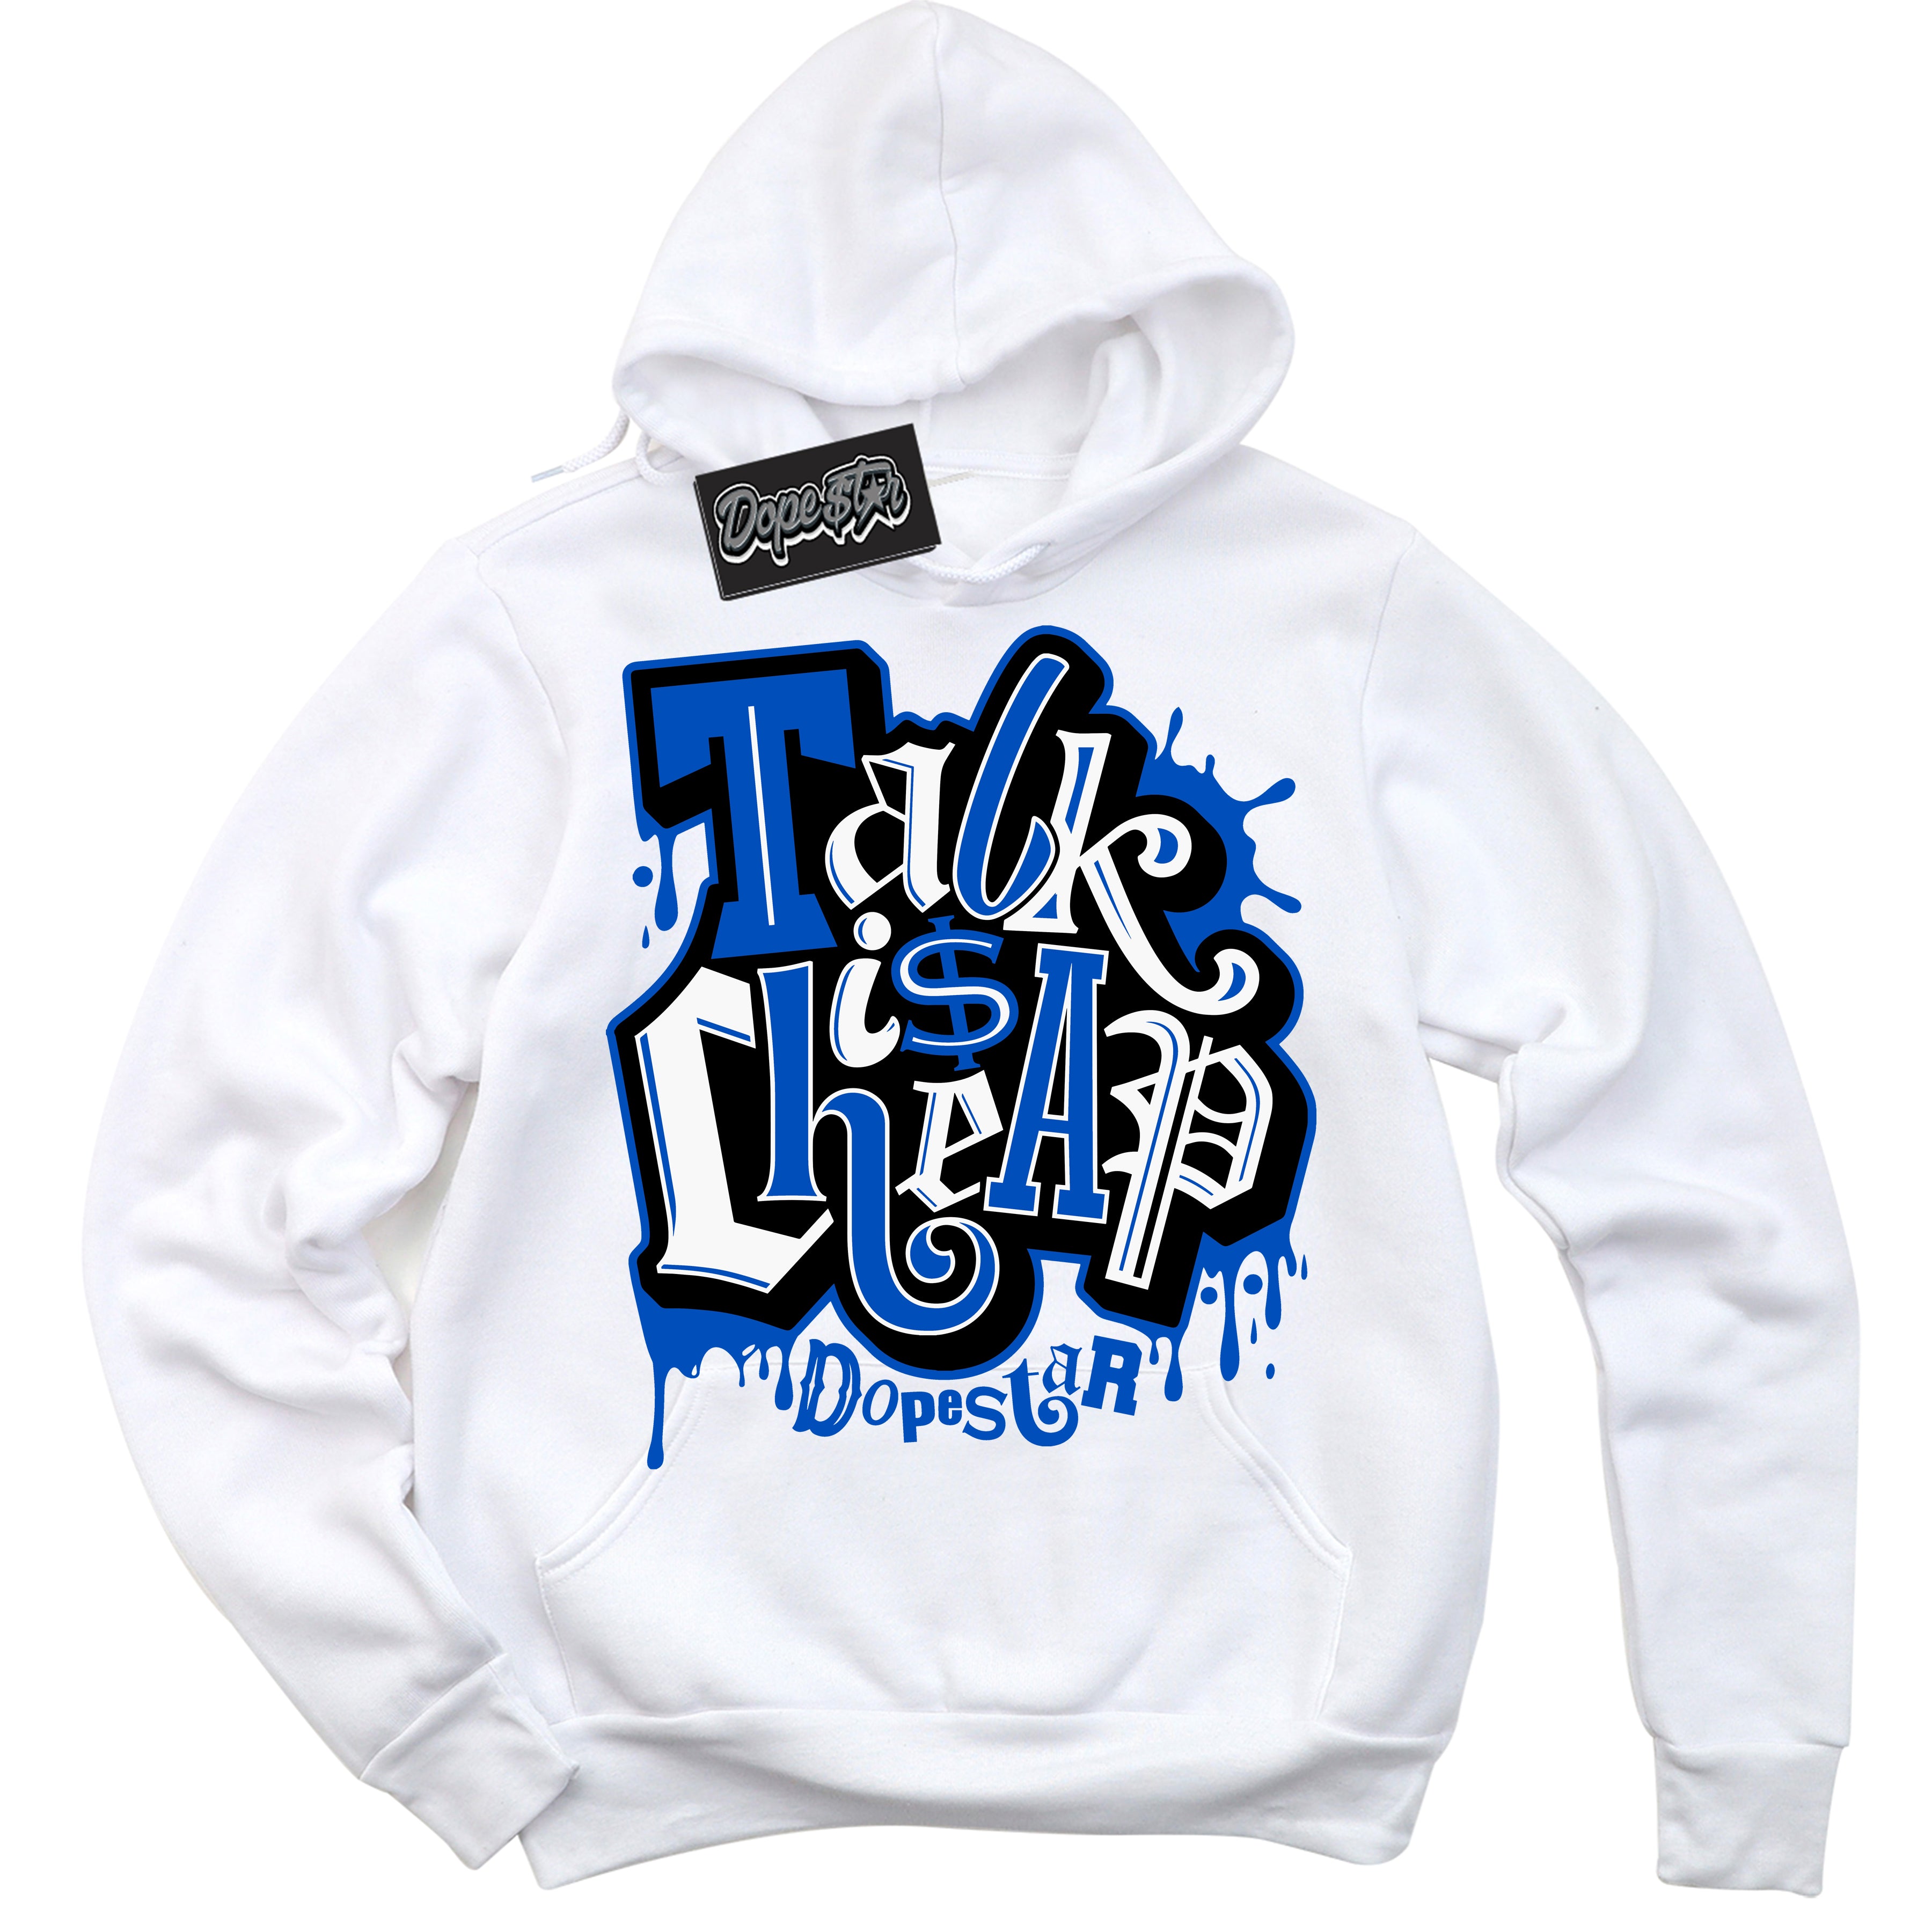 Cool White Hoodie with “ Talk Is Cheap ”  design that Perfectly Matches Royal Reimagined 1s Sneakers.